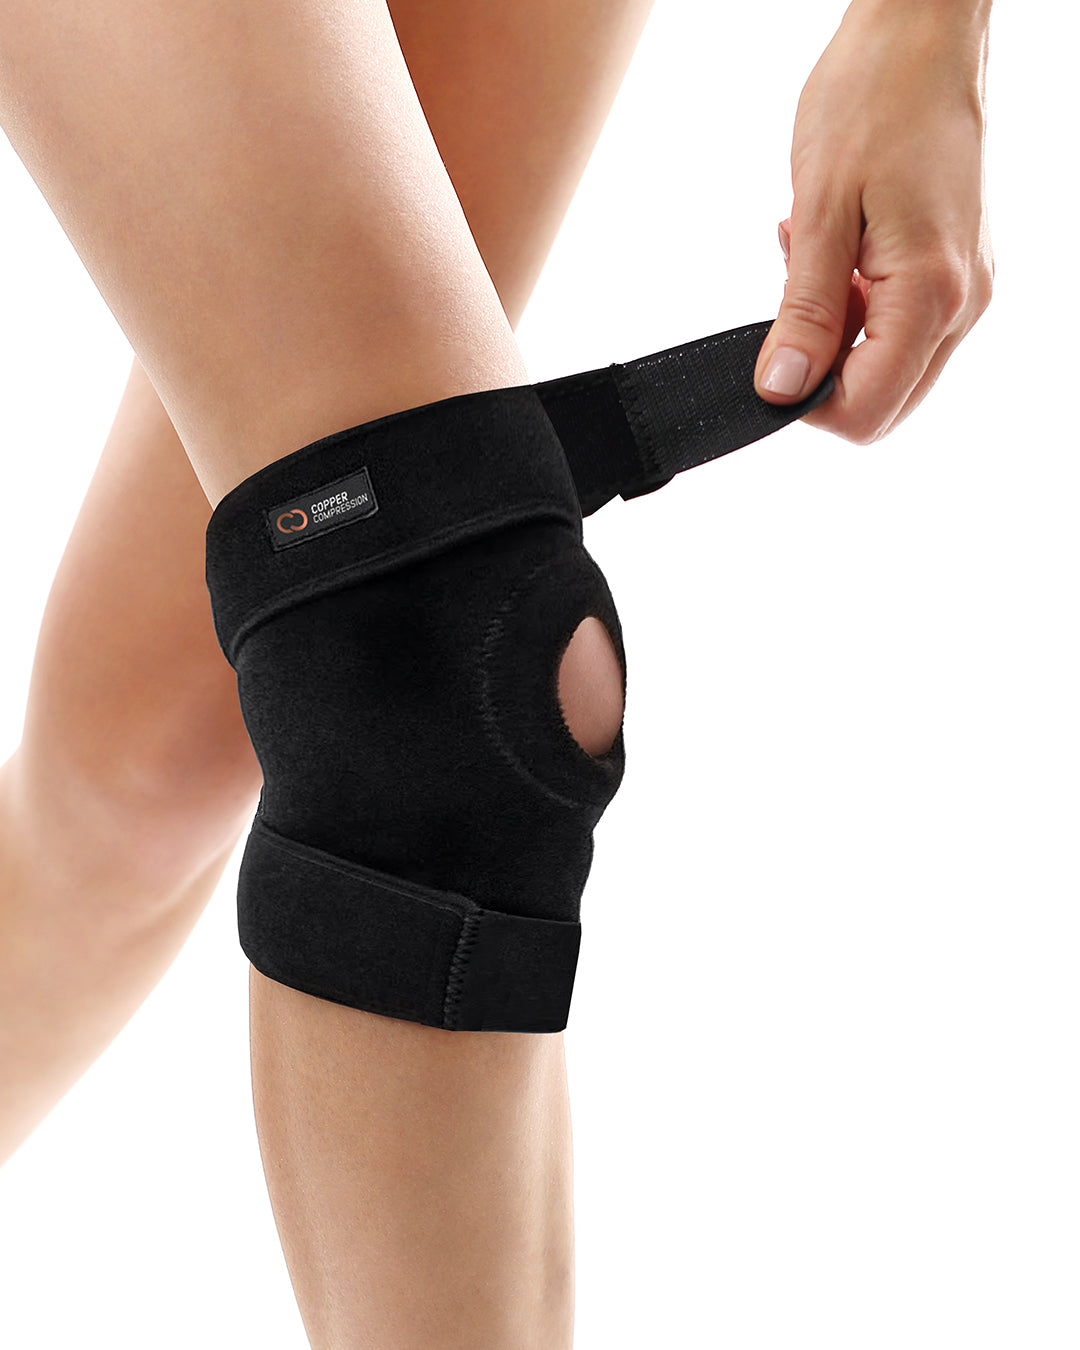  Copper Compression PowerKnit Knee Support Orthopedic Brace.  Lab-tested 15-20mmHg. Sleeve for Pain, ACL, Joint, Meniscus Tear. Running,  Basketball, Workout, Arthritis Fits Men & Women (L/XL) : Health & Household